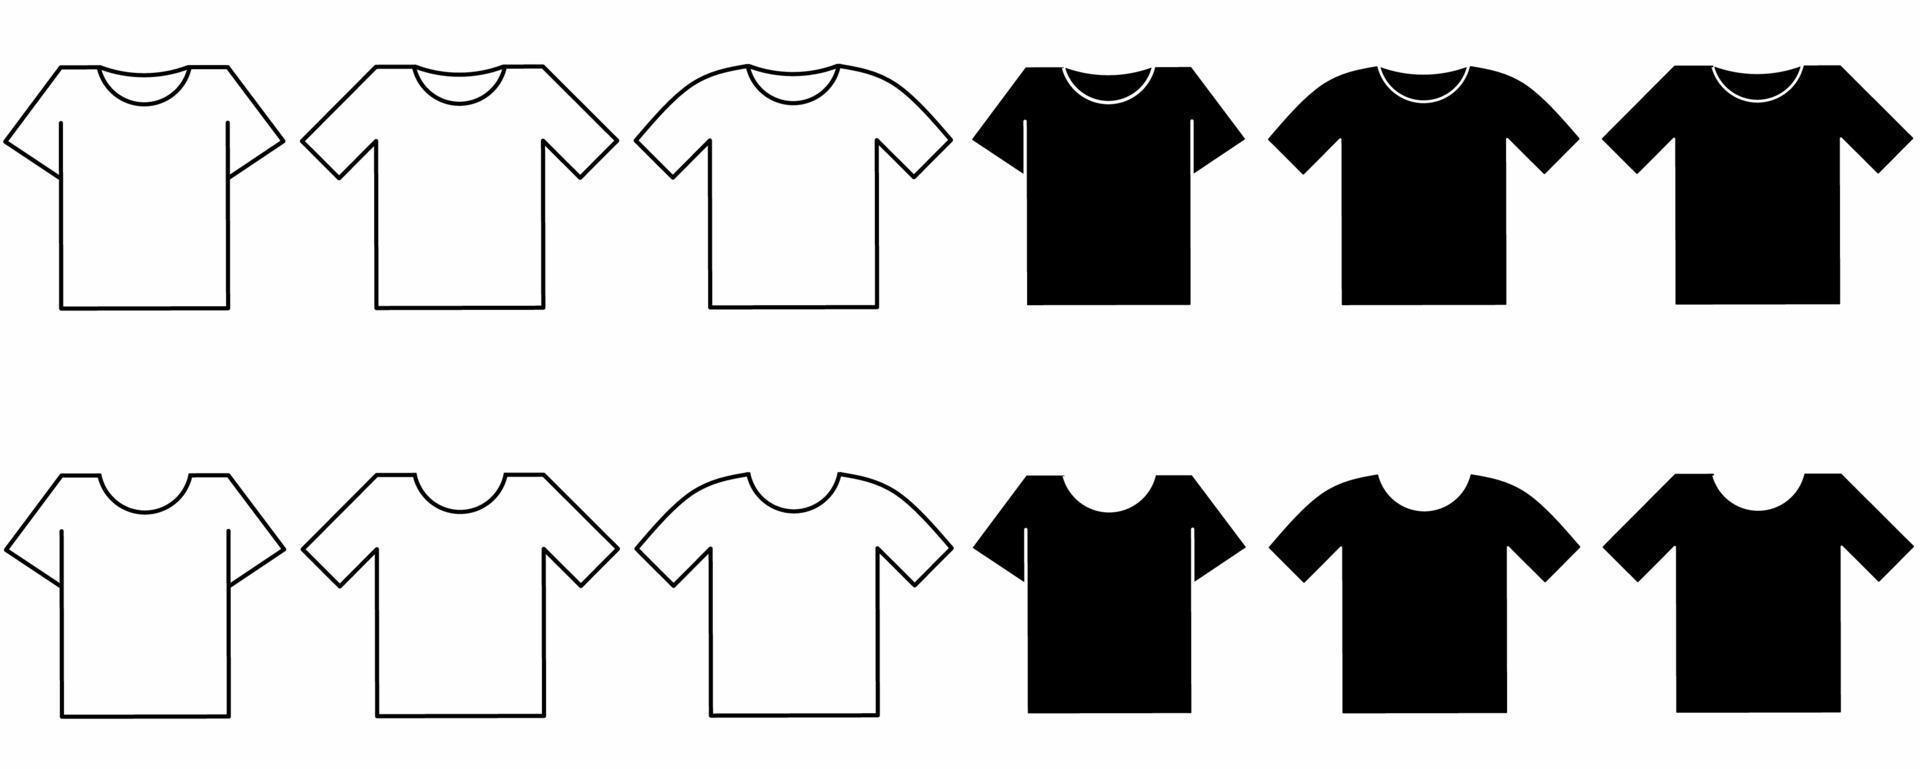 outline Silhouette t-shirt icon set isolated on white background vector